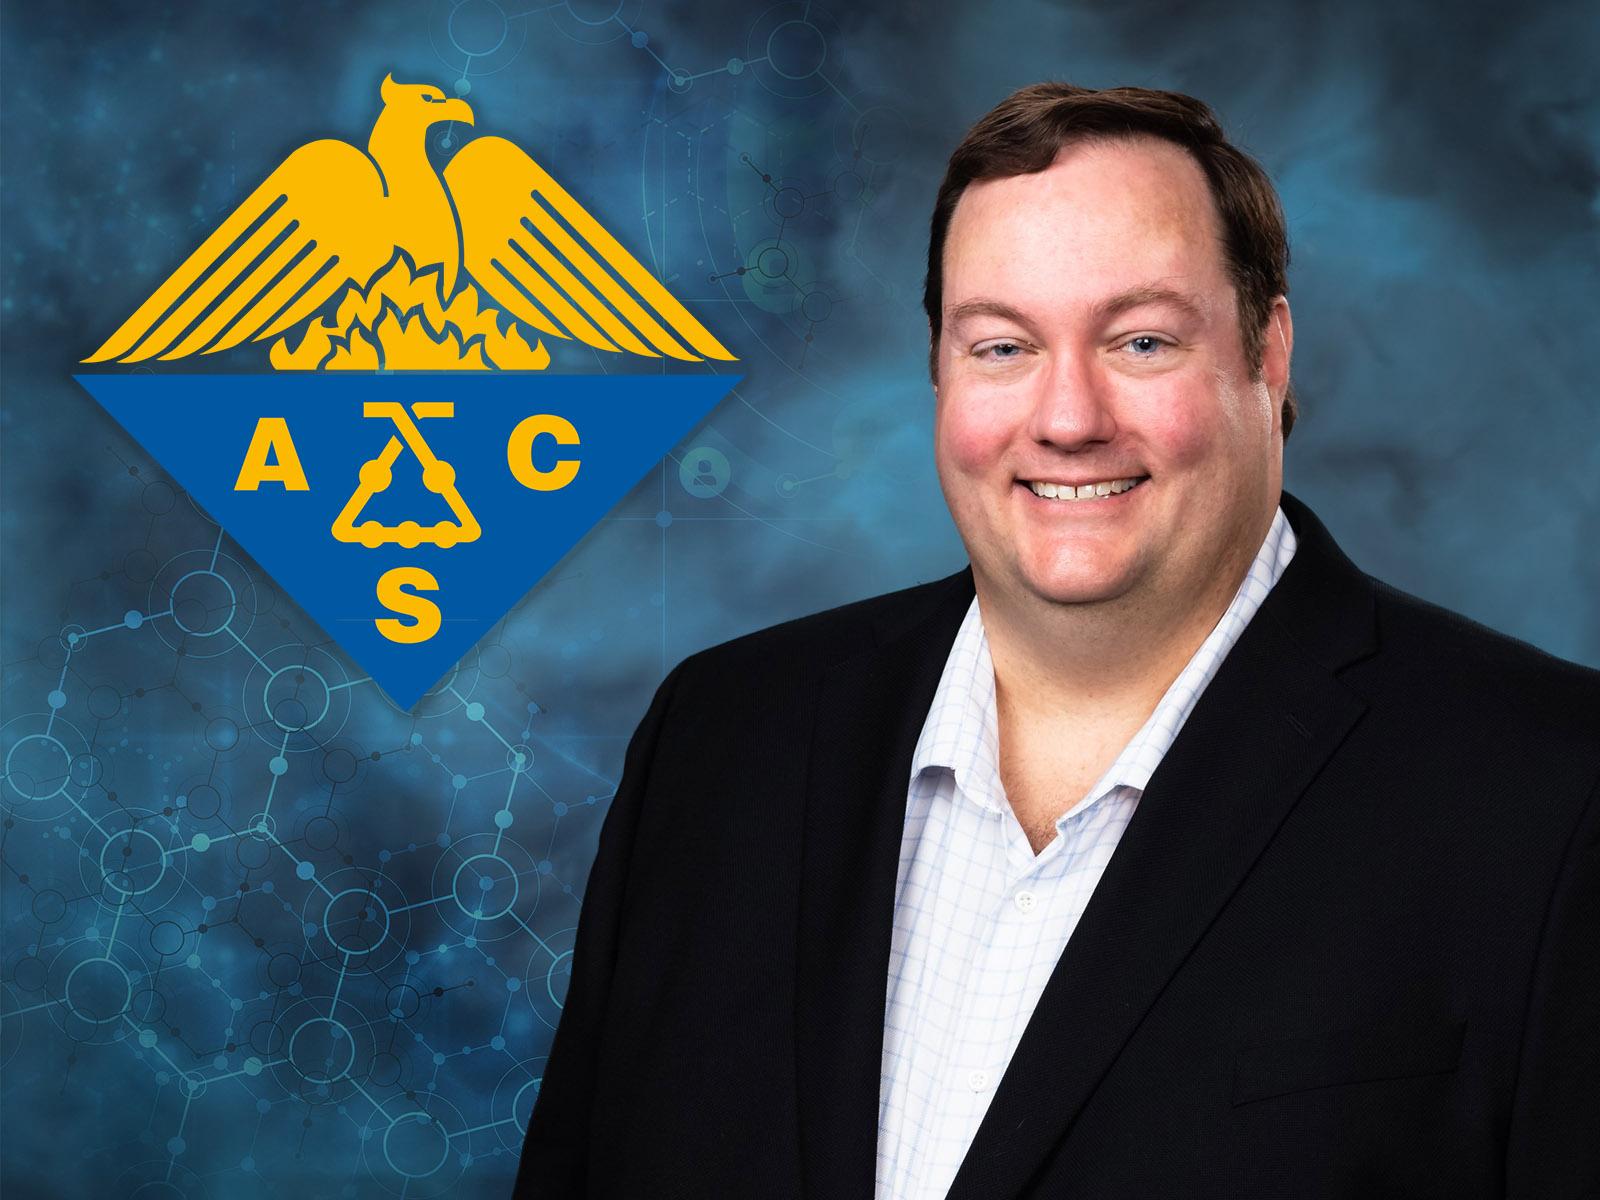 Photo of Glenn Fugate with the American Chemical Society logo composited on a digital background